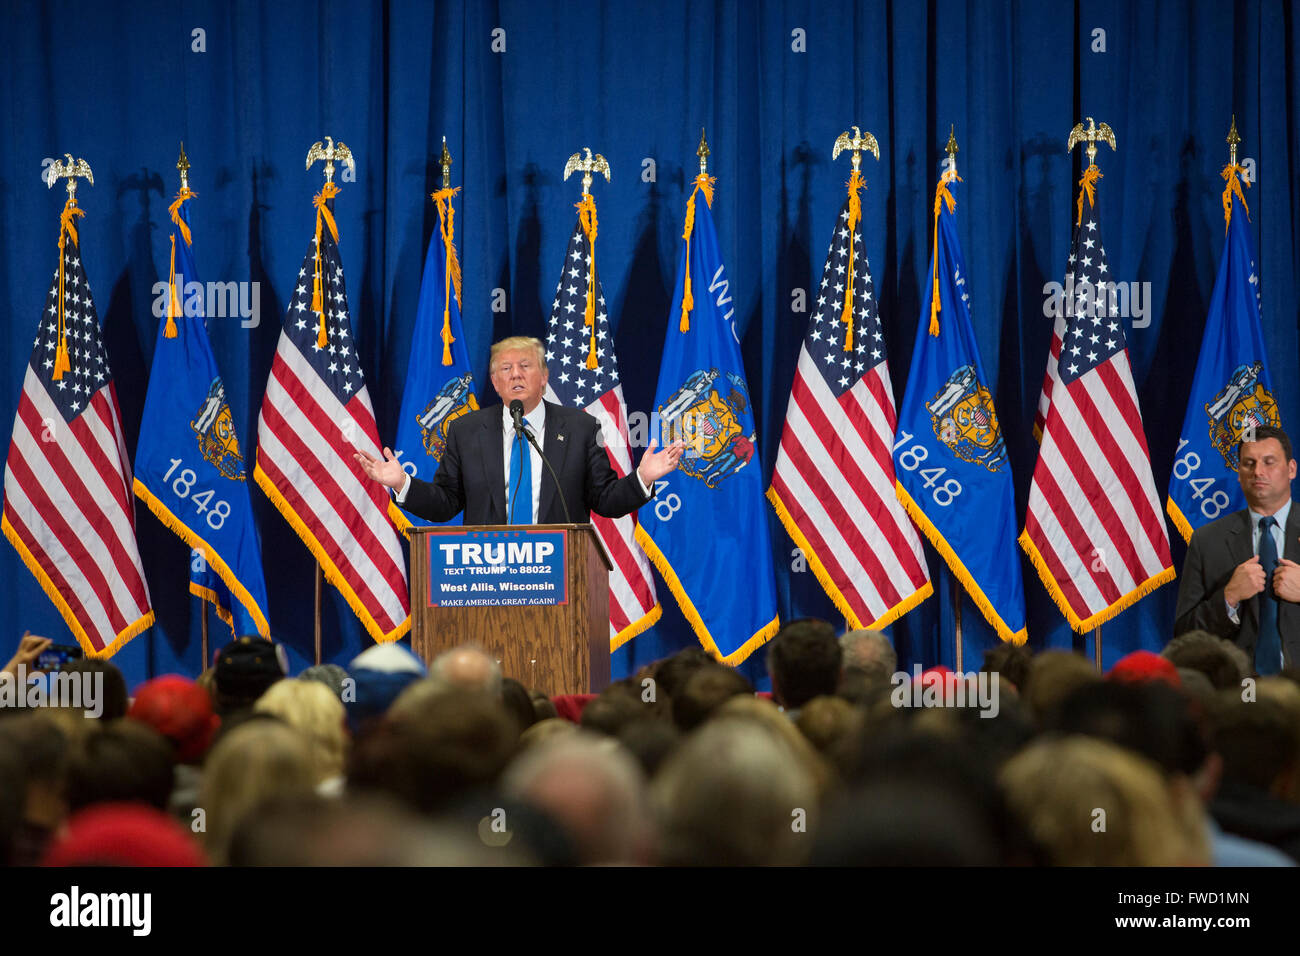 West Allis, Wisconsin USA - 3 April 2016 - Donald Trump campaigns for the Republican presidential nomination. Credit:  Jim West/Alamy Live News Stock Photo